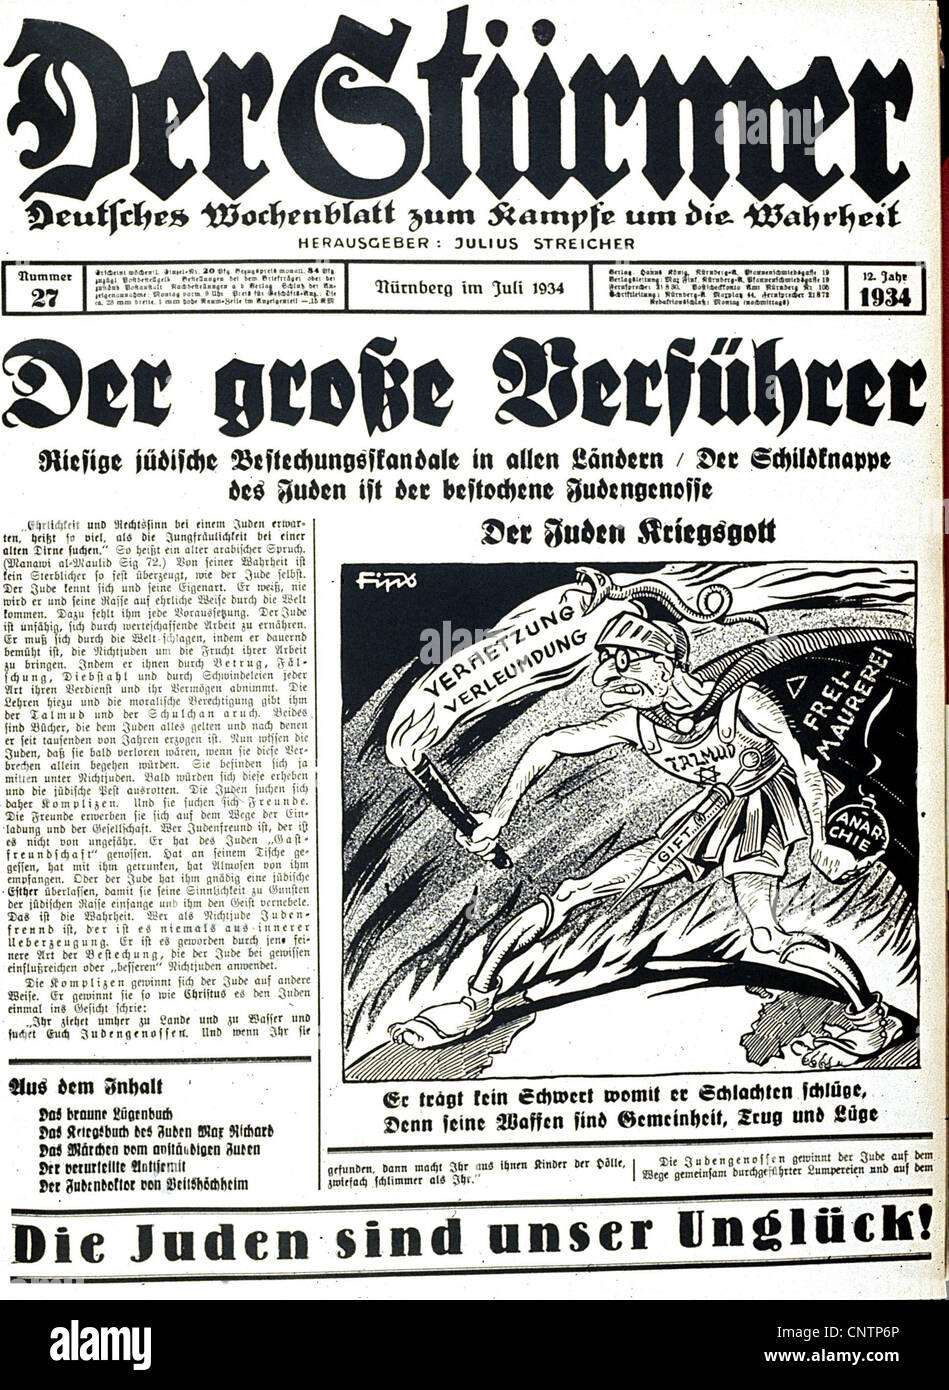 National Socialism / Nazism, propaganda, press / media, "Der Stuermer", Nuremberg, July 1934, front page, headline: "The great deluder", caricature "The Jewish god of war", Additional-Rights-Clearences-Not Available Stock Photo